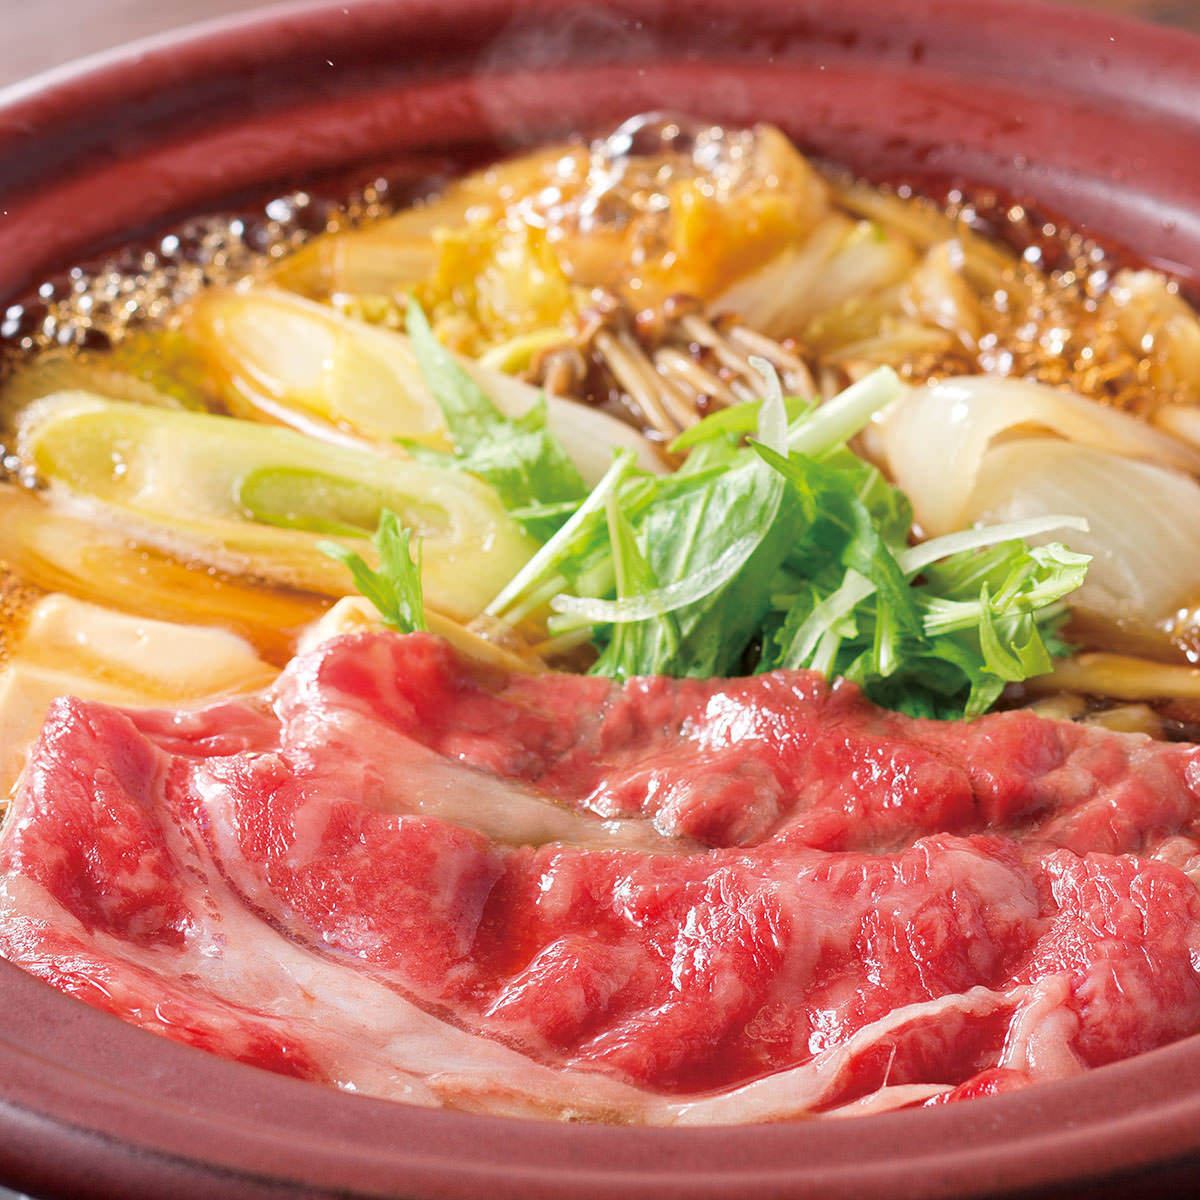 We offer a course menu that allows you to fully enjoy popular Kyushu cuisine!